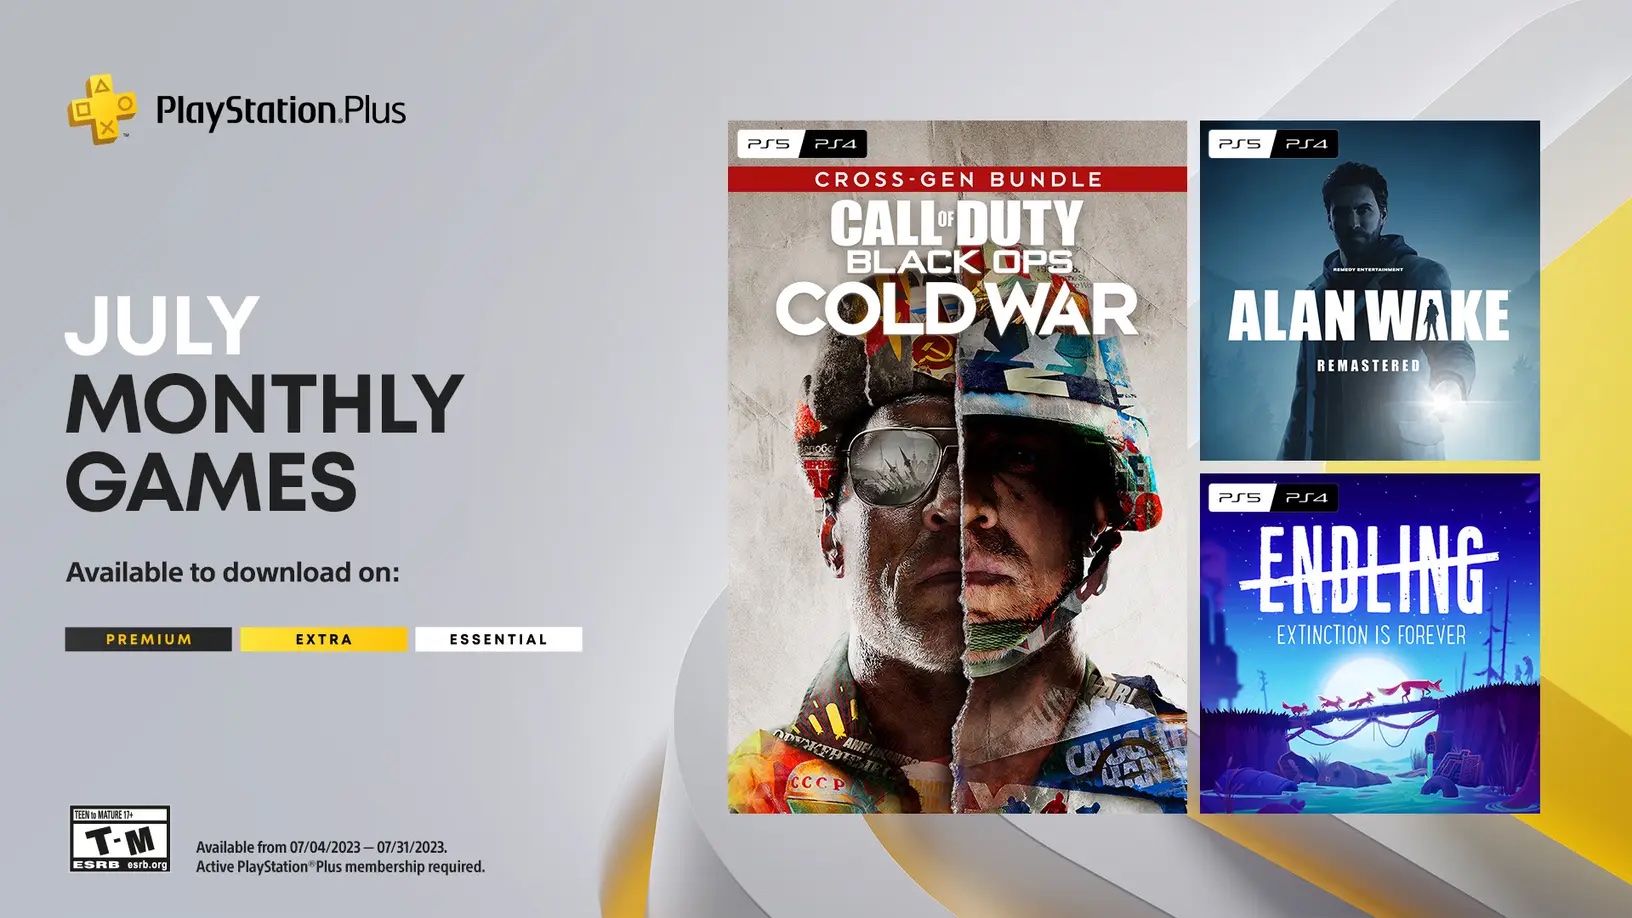 Sony PlayStation Plus users to get Call of Duty: Black Ops 4, other games  for free: Here's how